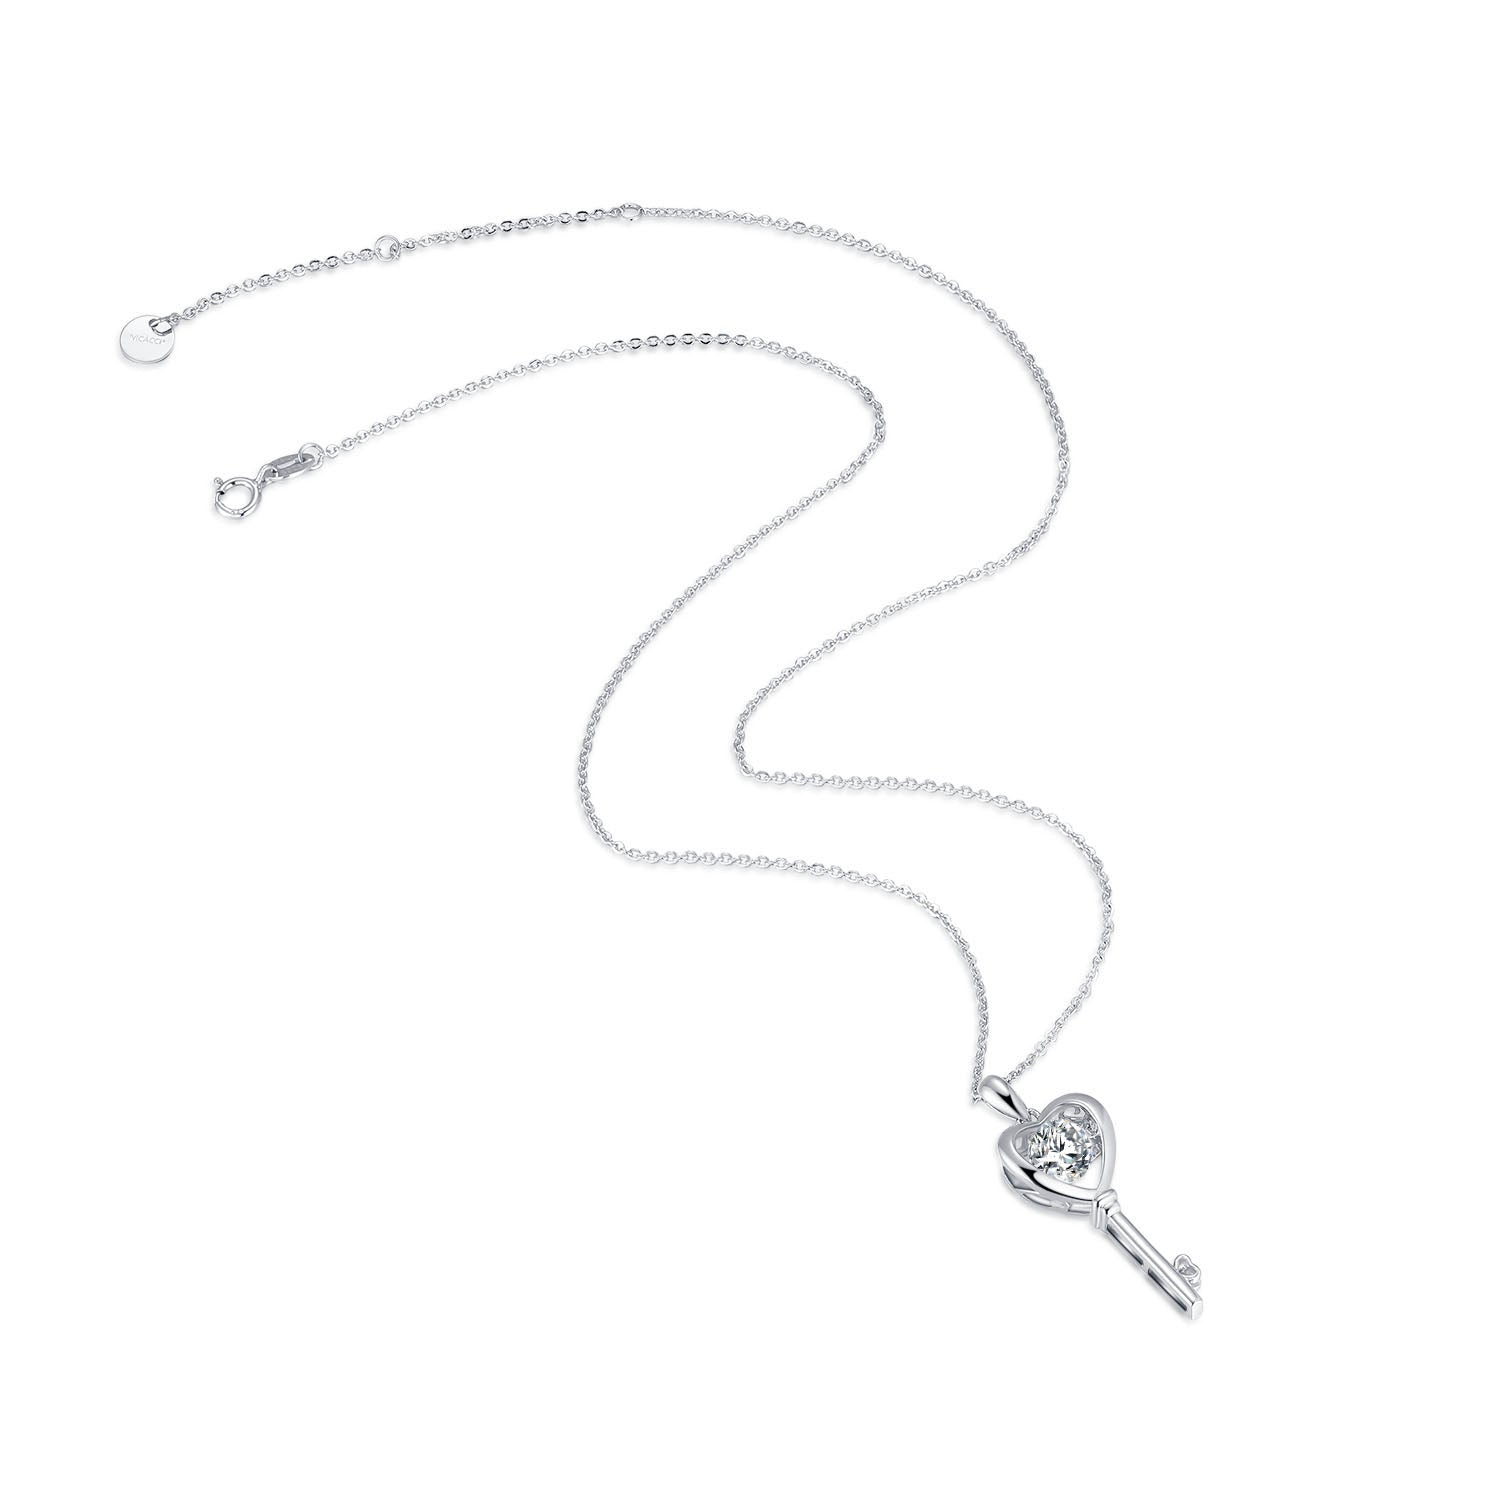 Lover's key 925 sterling silver smart necklace